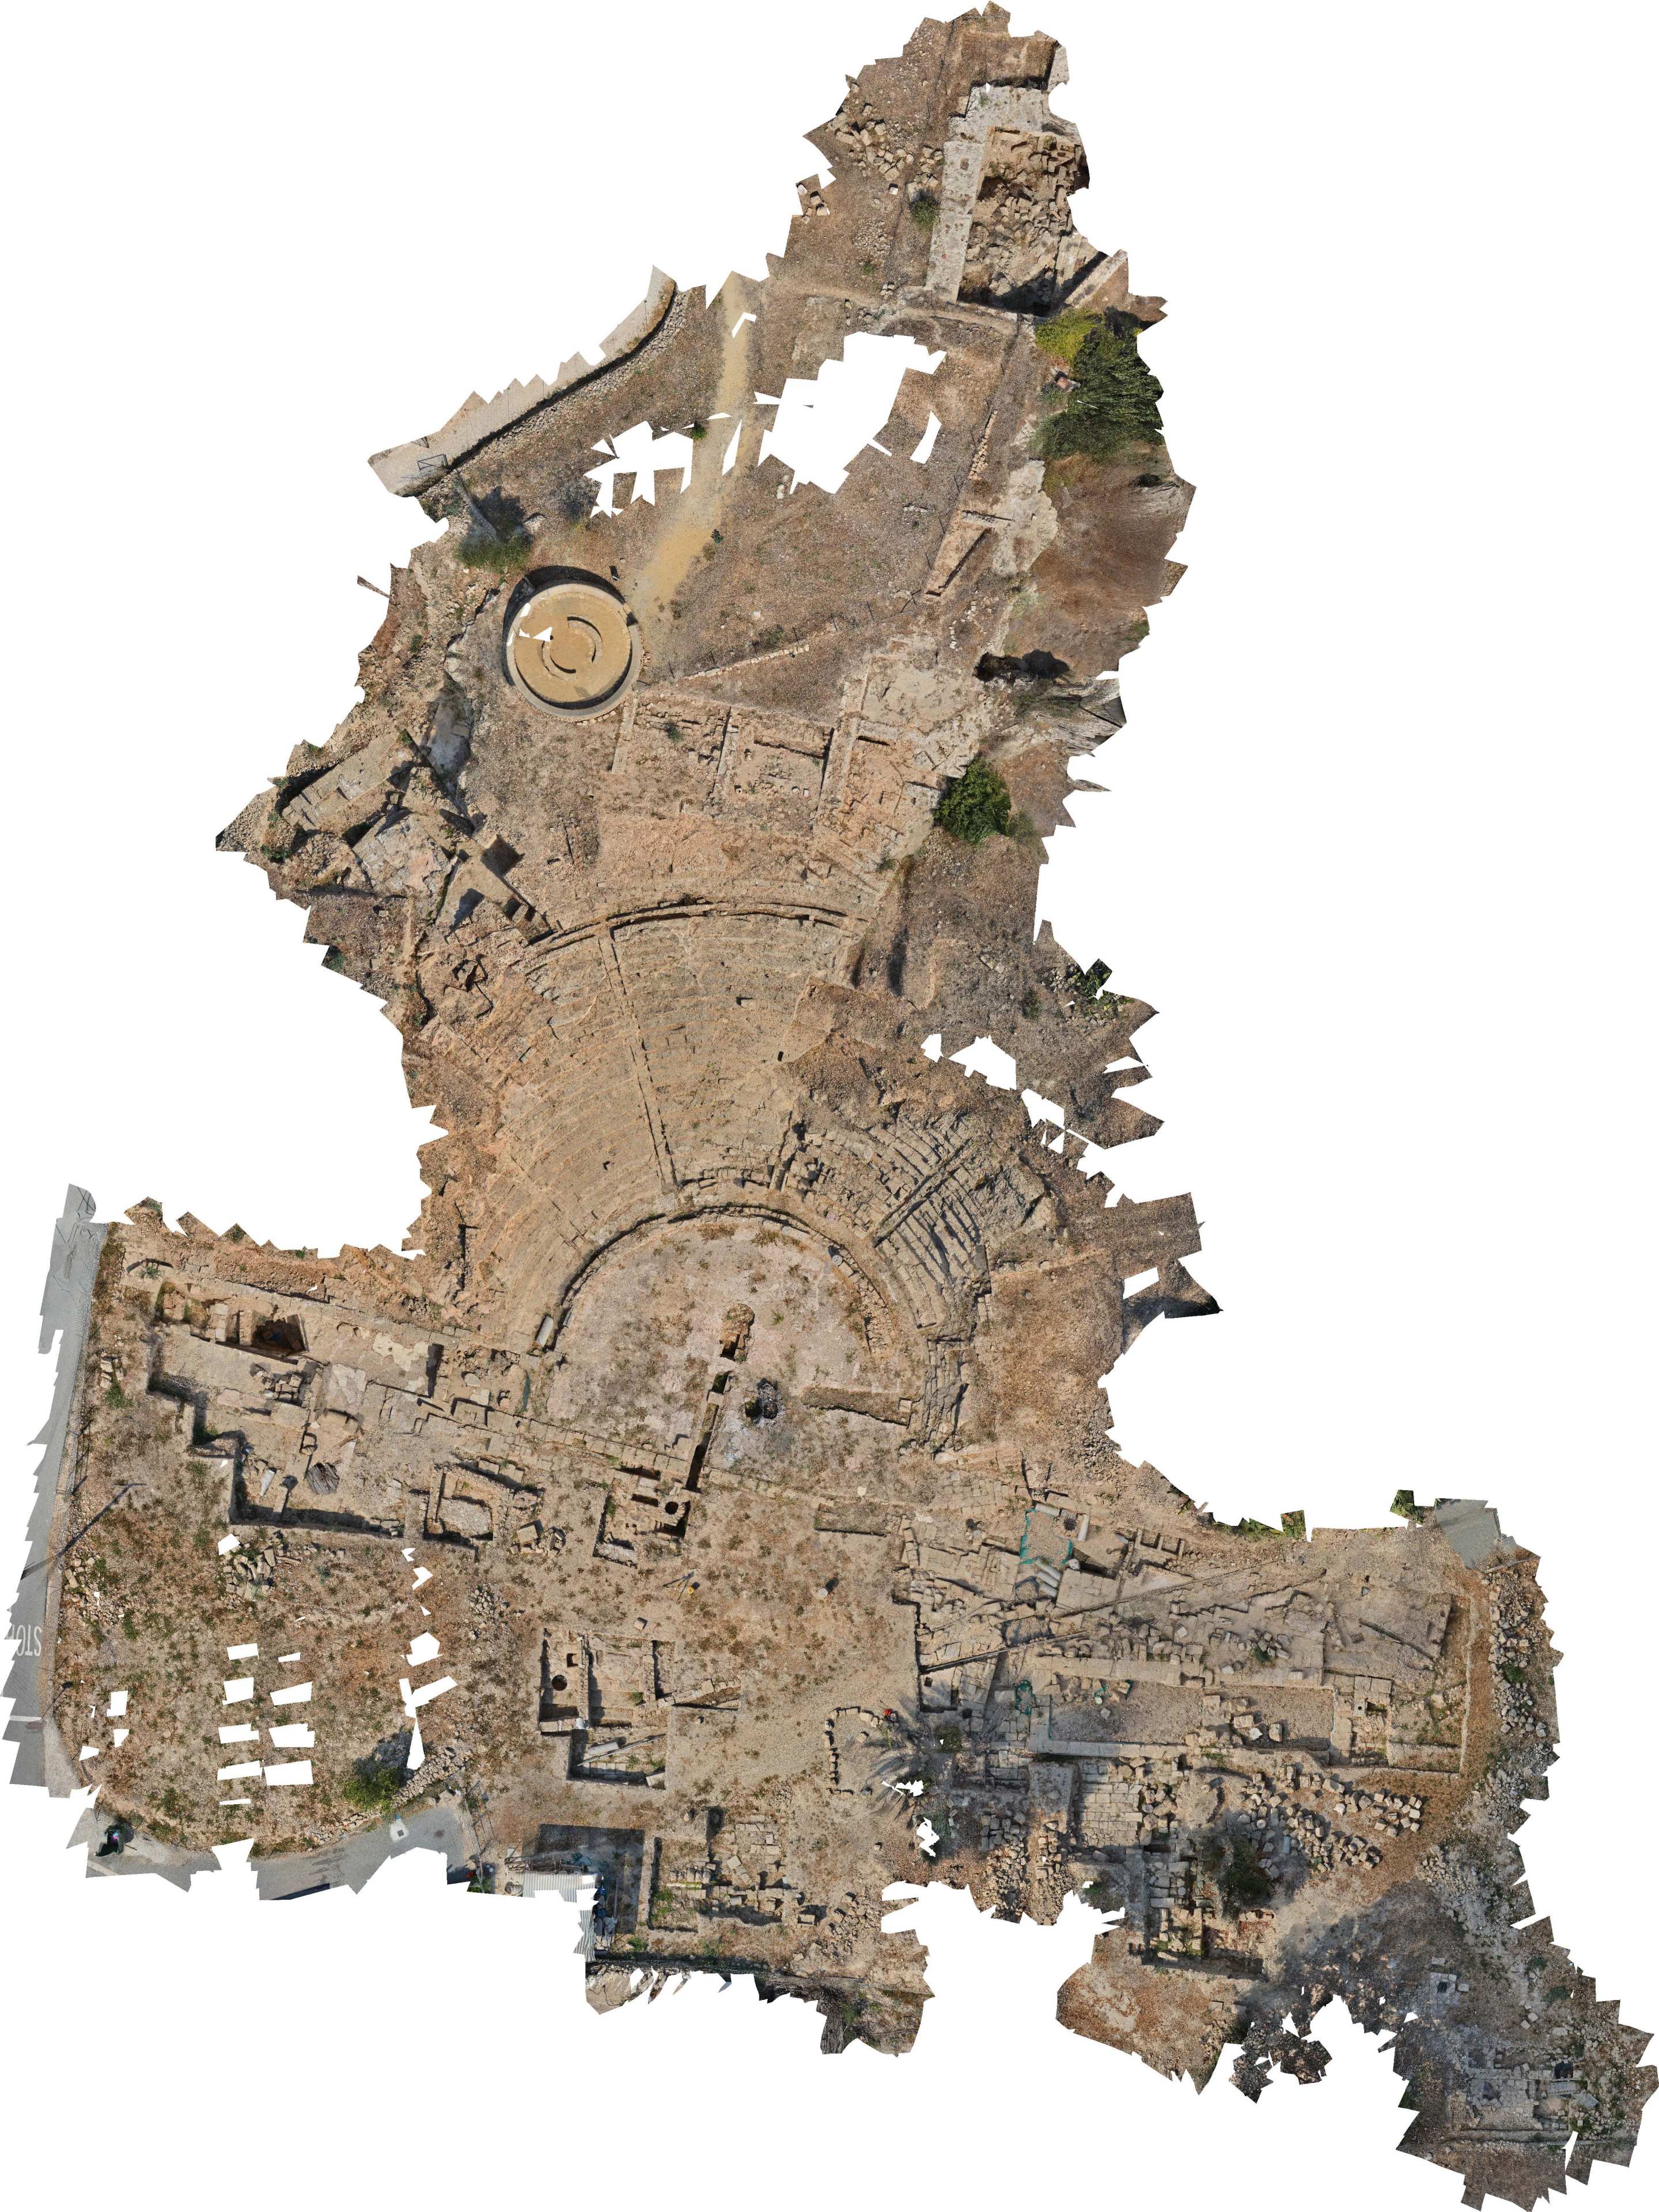 This image, using photogrammetric technology, captures the surviving remains of the ancient theatre in Neo Paphos.